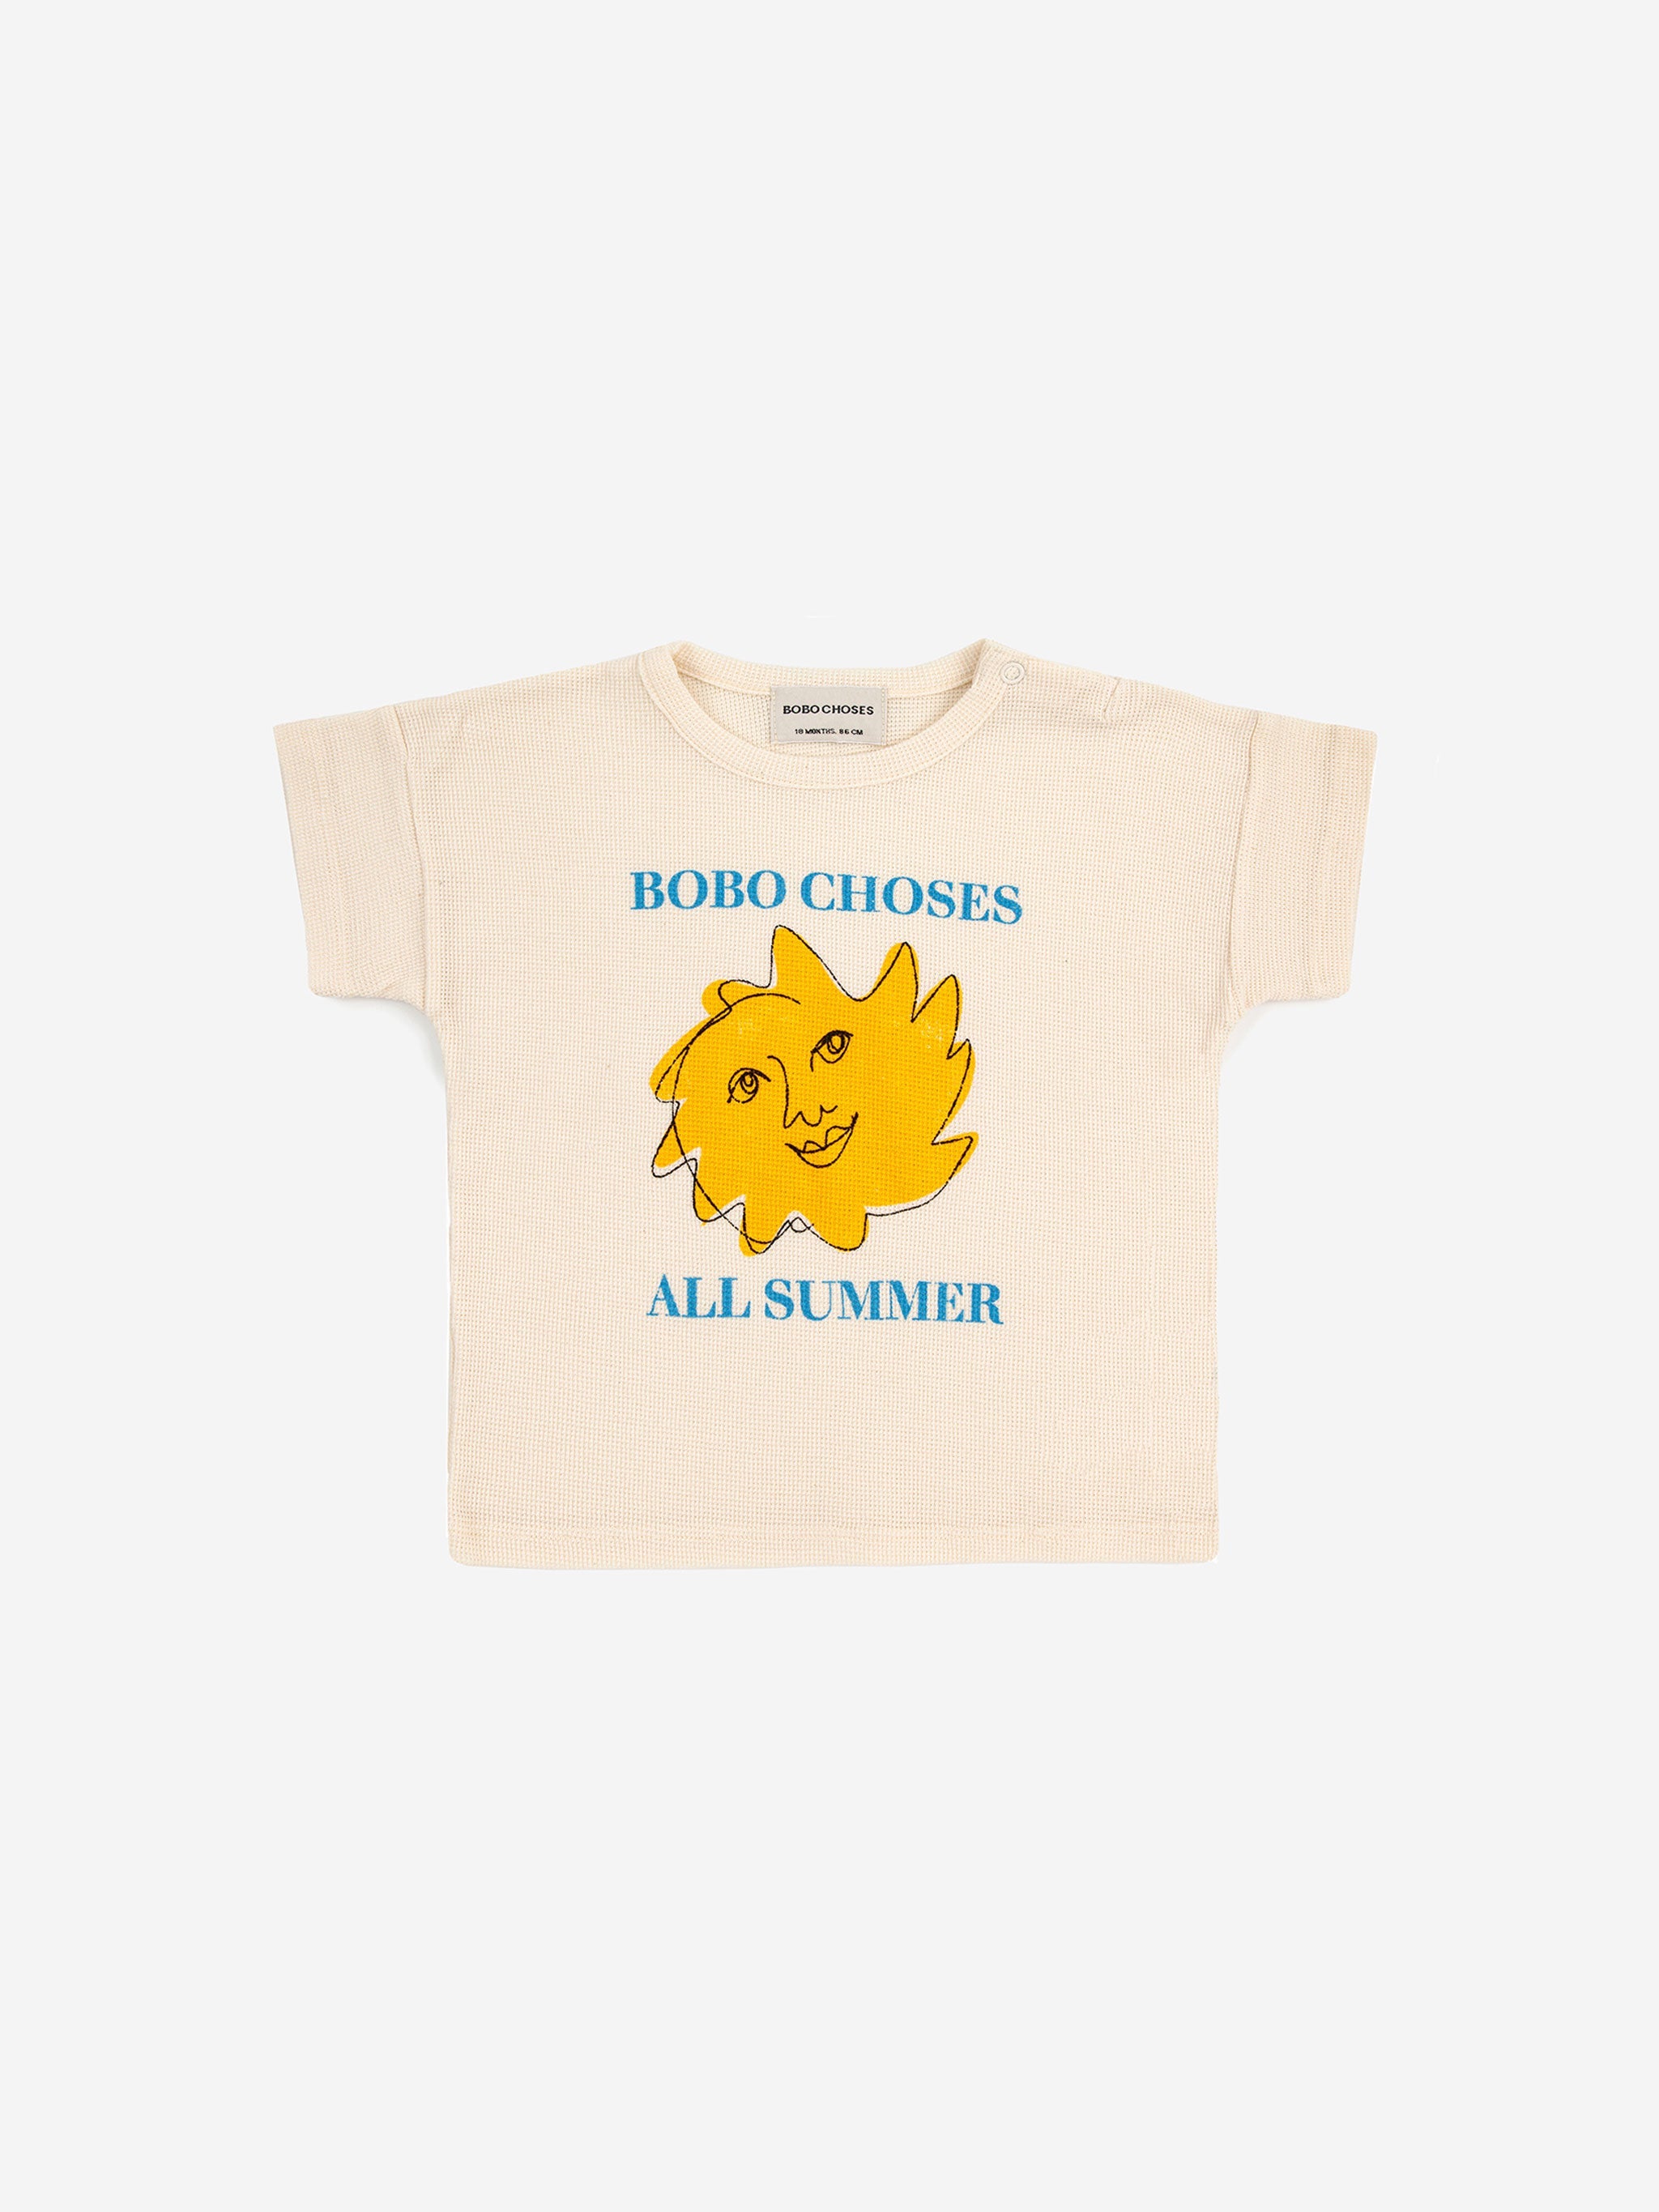 Bobo Choses SS23 B-Side Baby collection